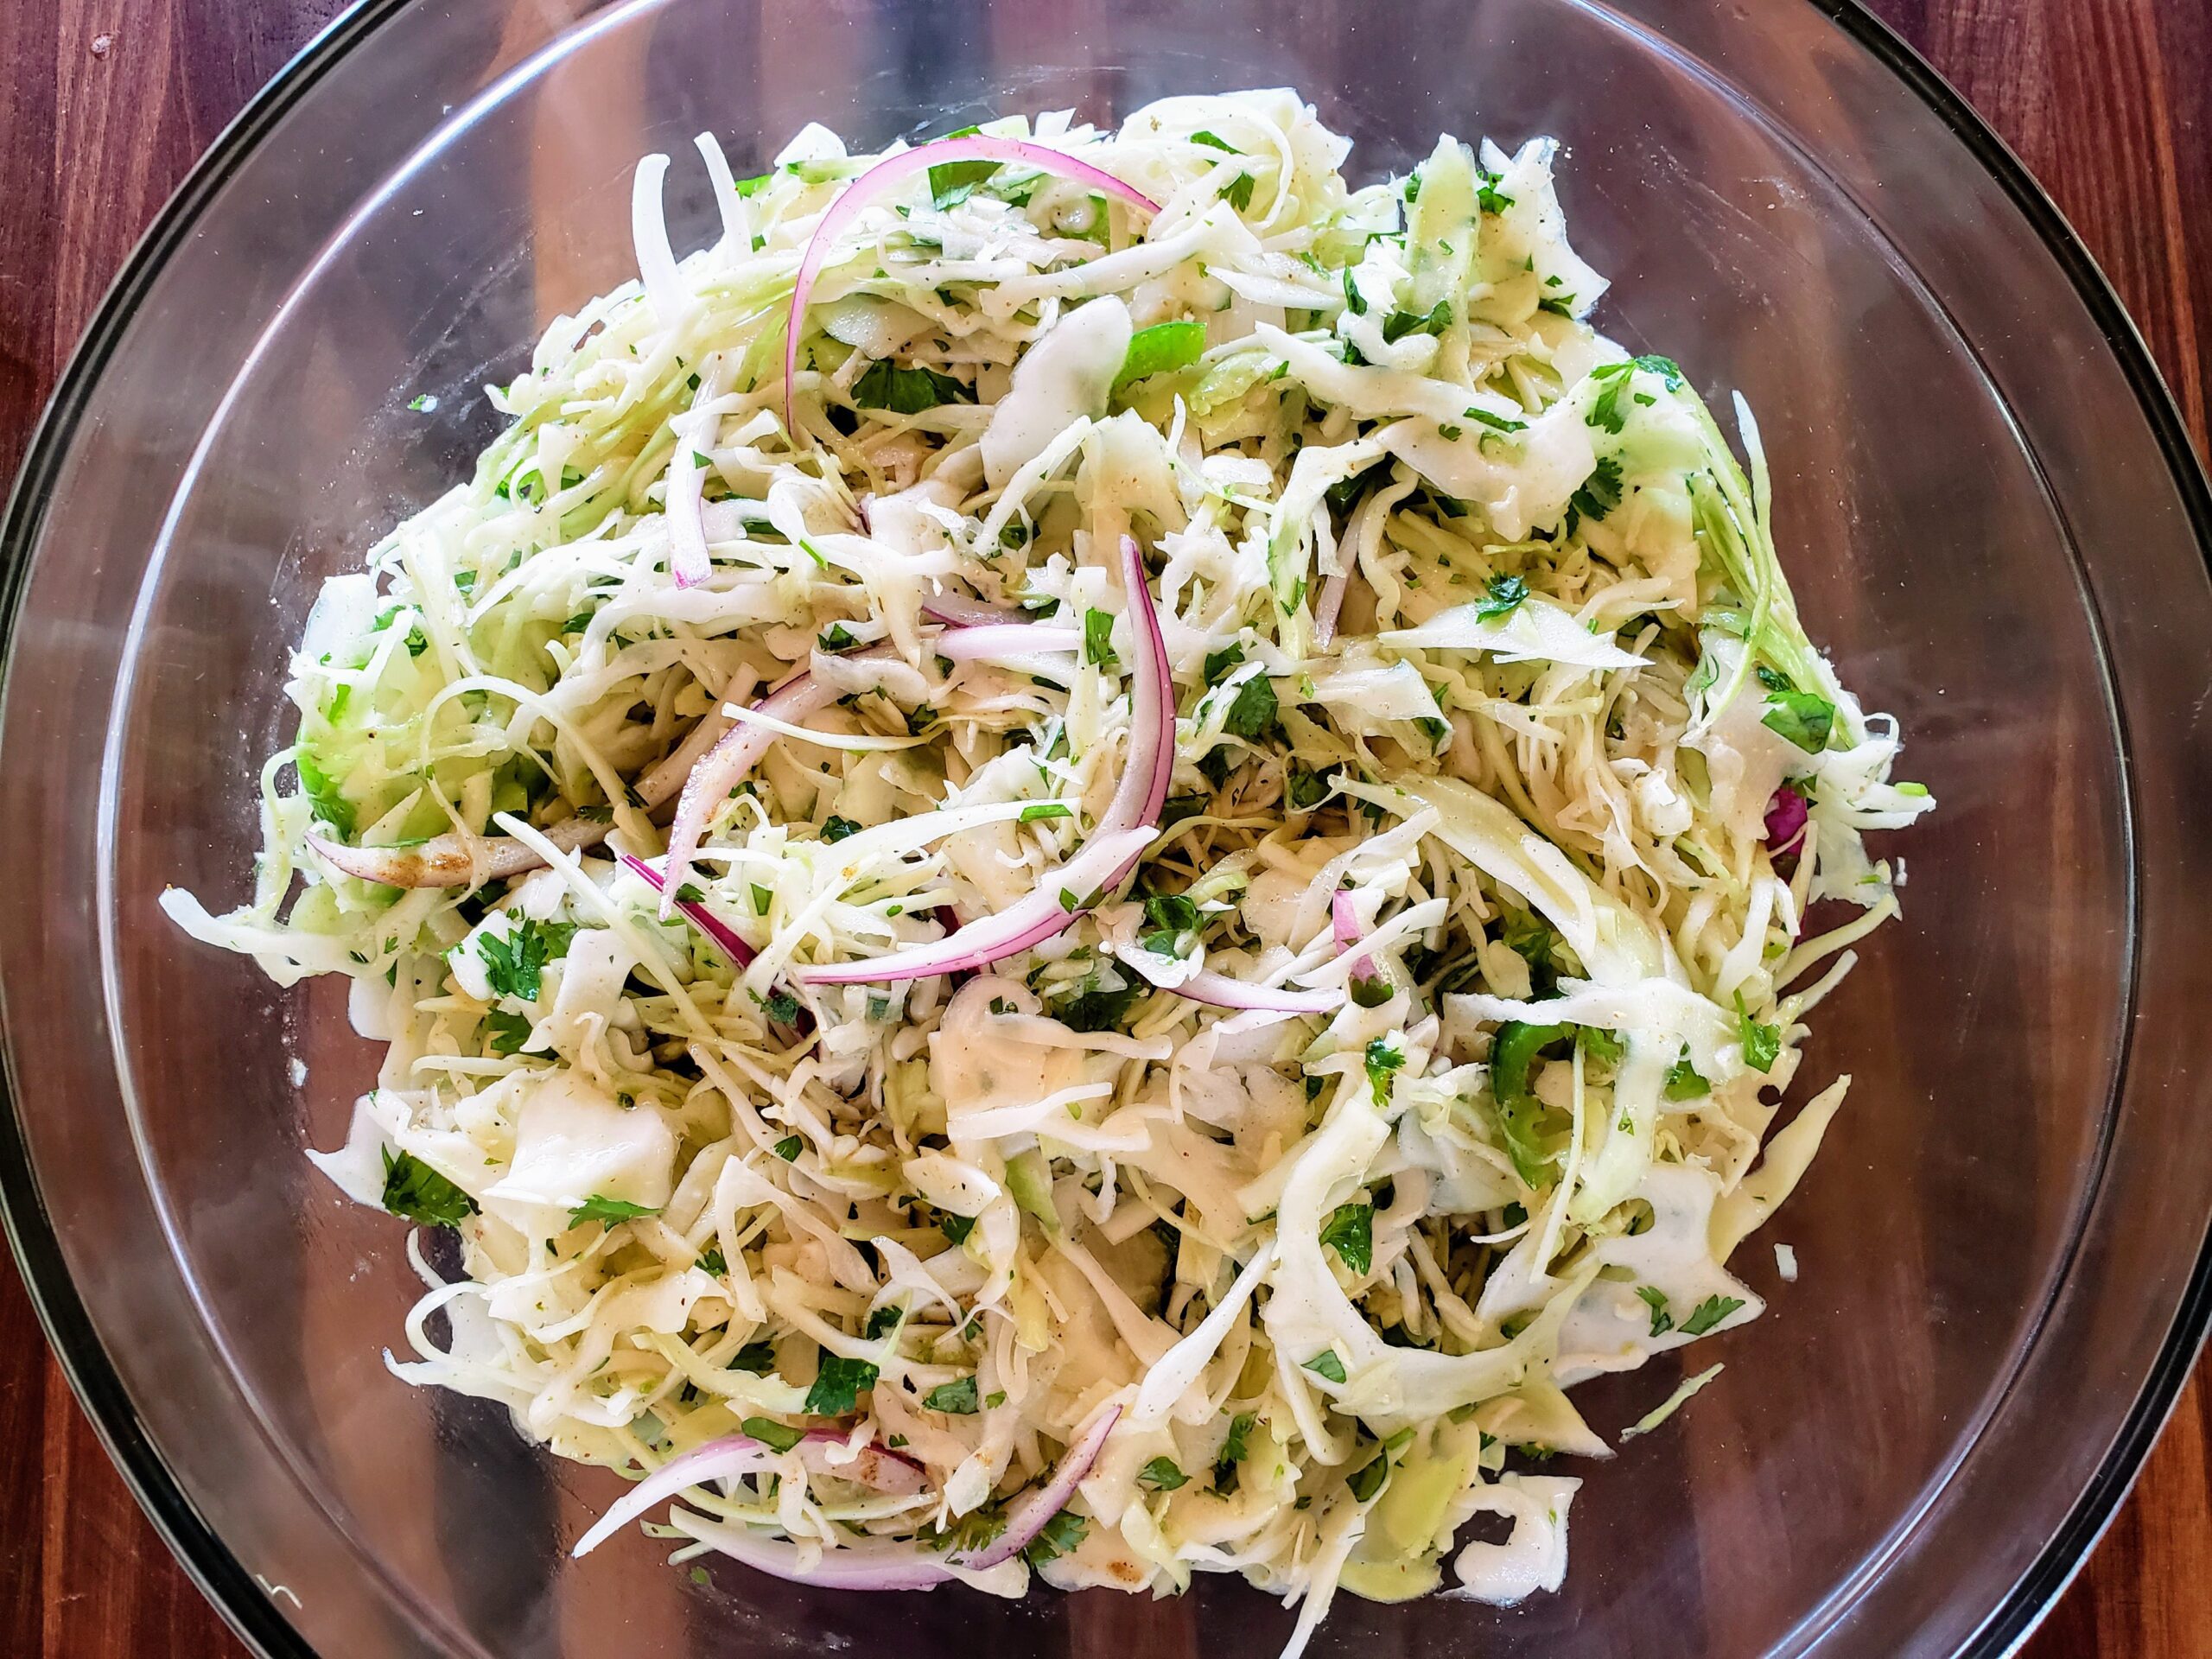 https://cuisinewithme.com/wp-content/uploads/2021/09/Cilantro-lime-cabbage-slaw-2-scaled.jpg